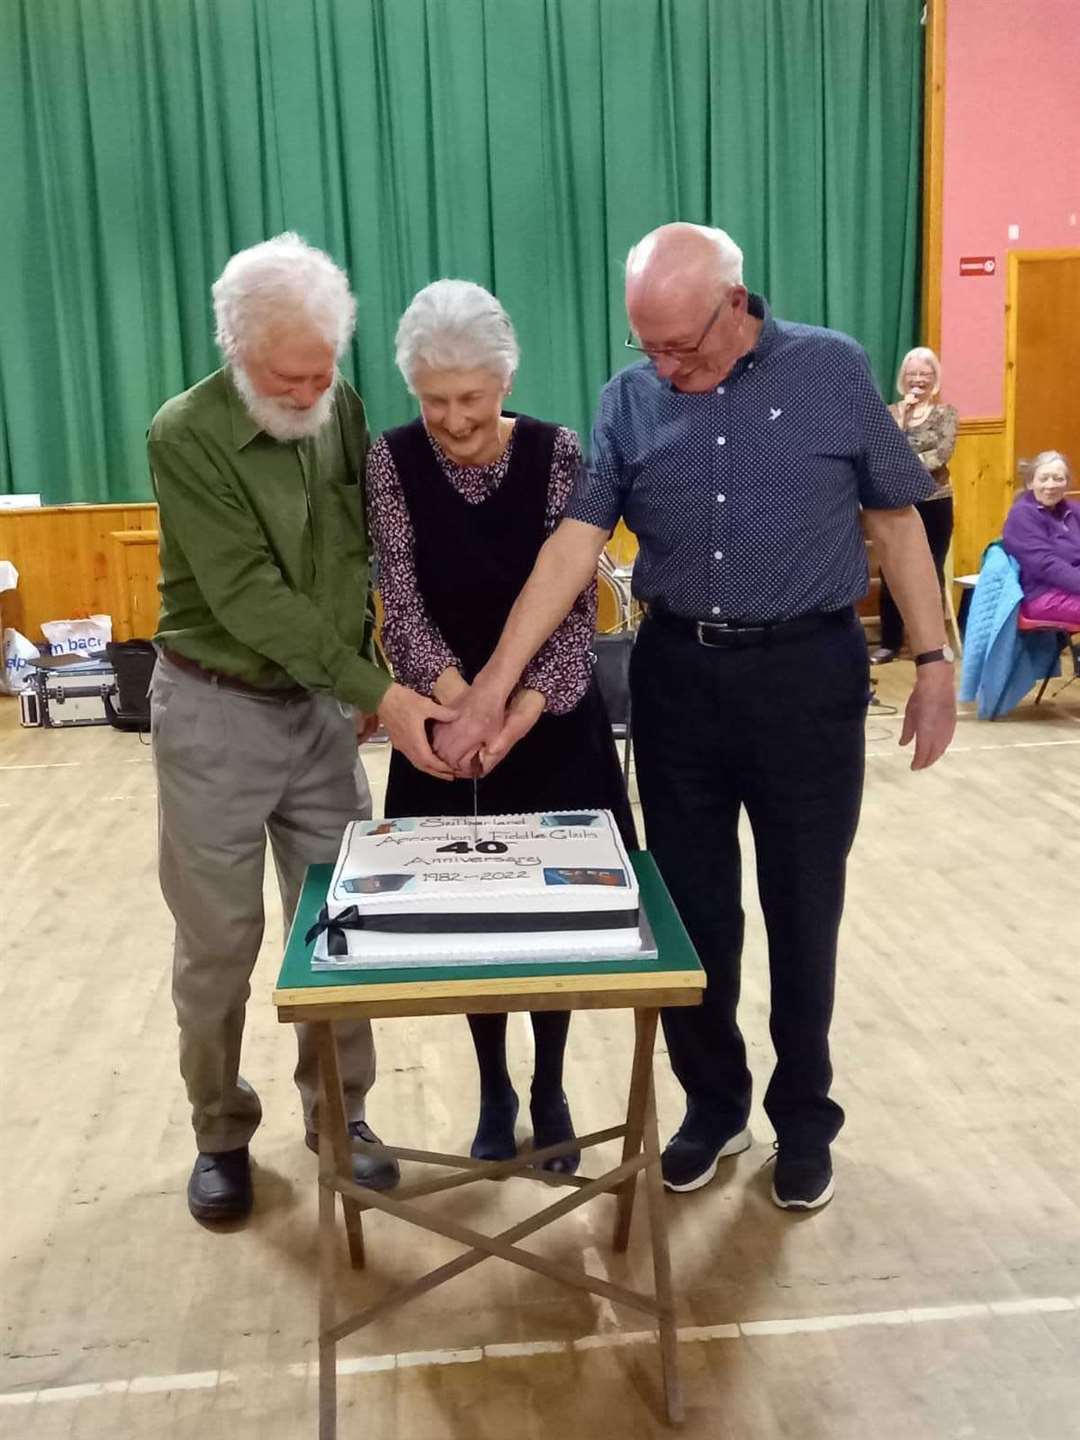 The three original members were given the honour of cutting the cake.